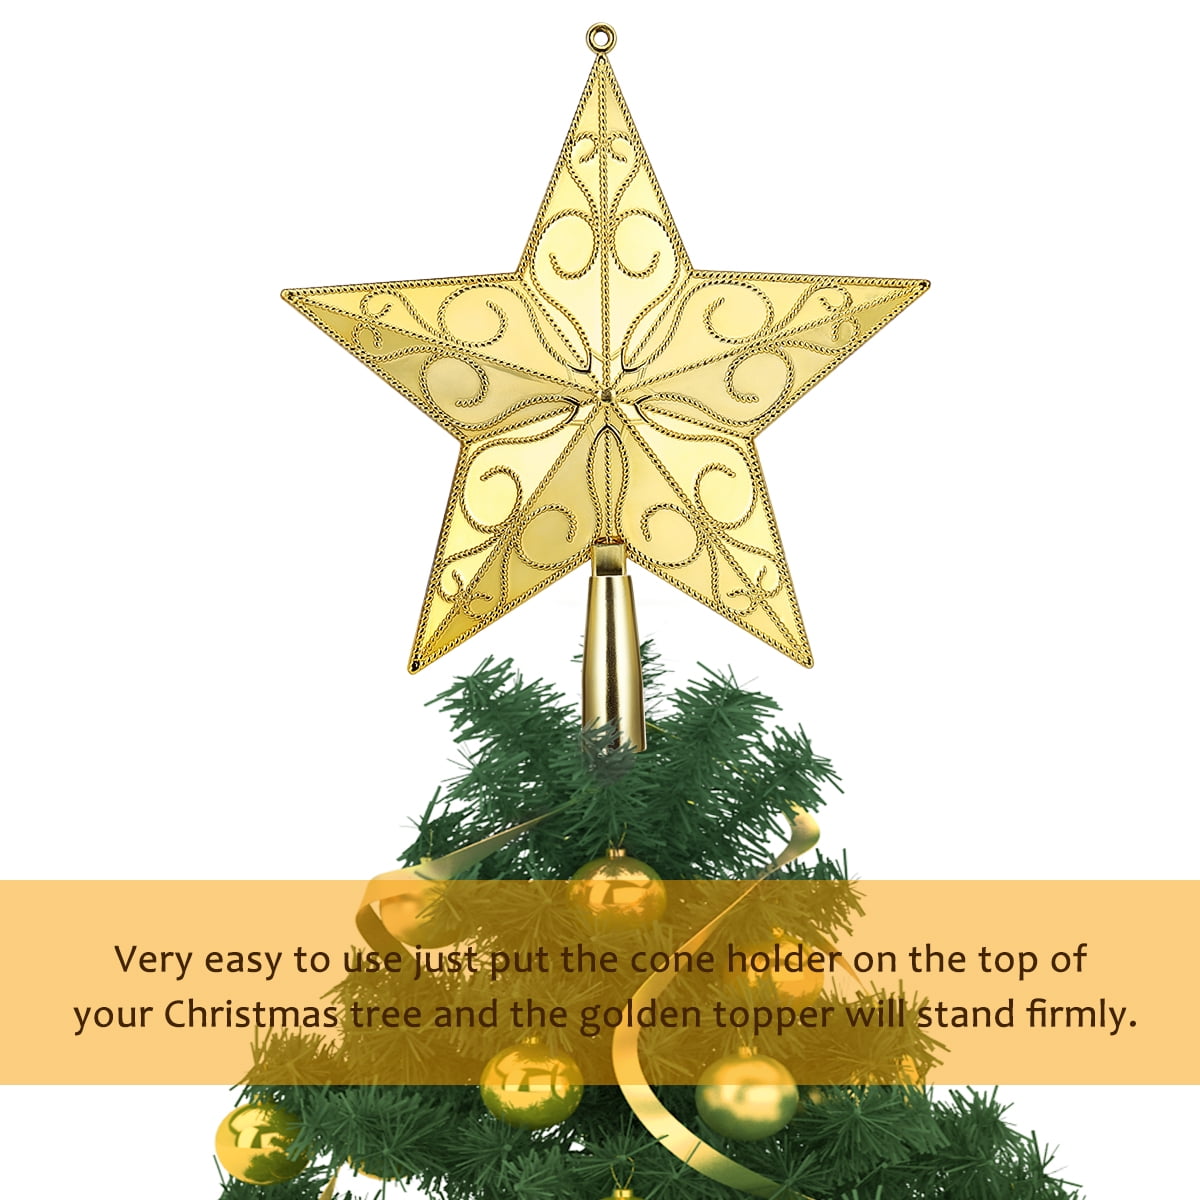 Winwinfly 1 Pcs 20cm Star Tree Topper Star Christmas Holiday Tree Topper Five Point Plastic Star Festival Treetop Decor for Home Party Golden